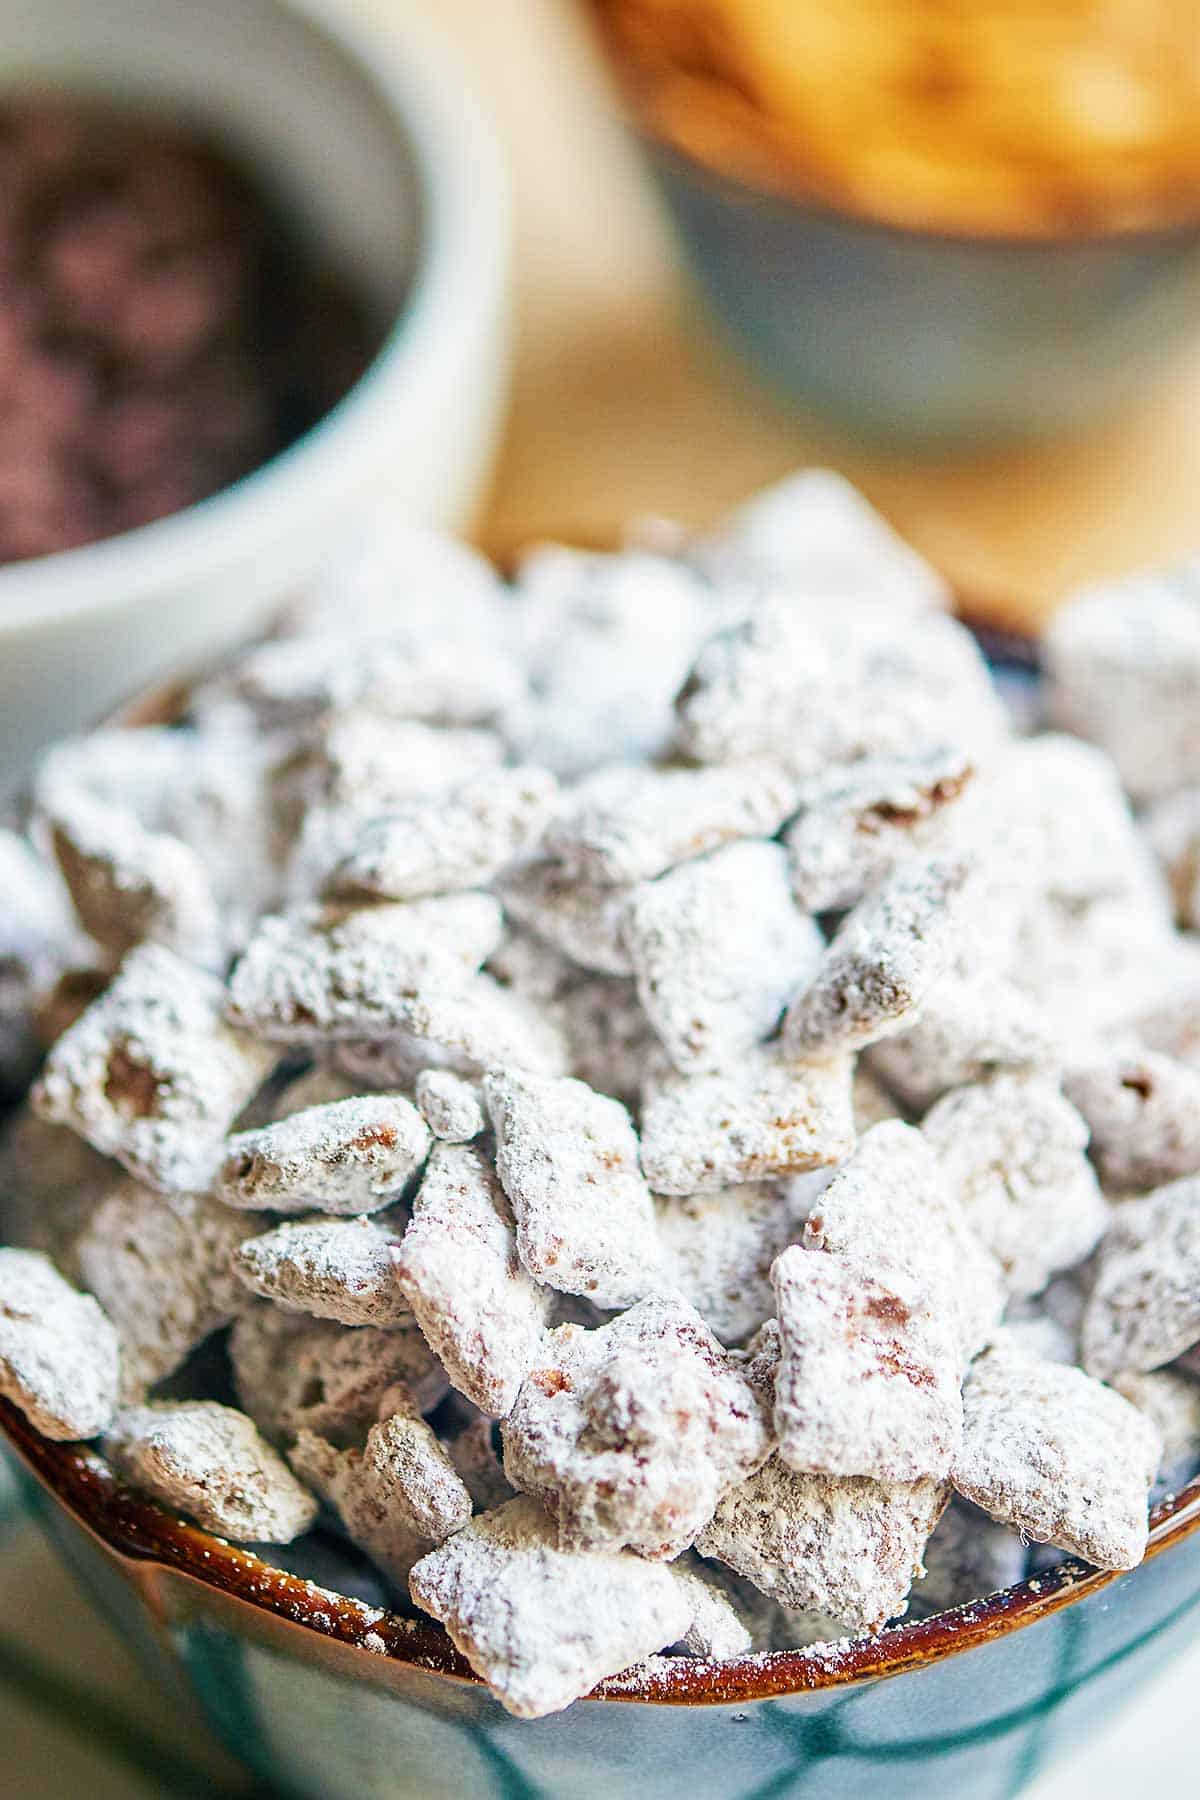 Best Puppy Chow Recipe Aka Muddy Buddies Uses Whole Cereal Box